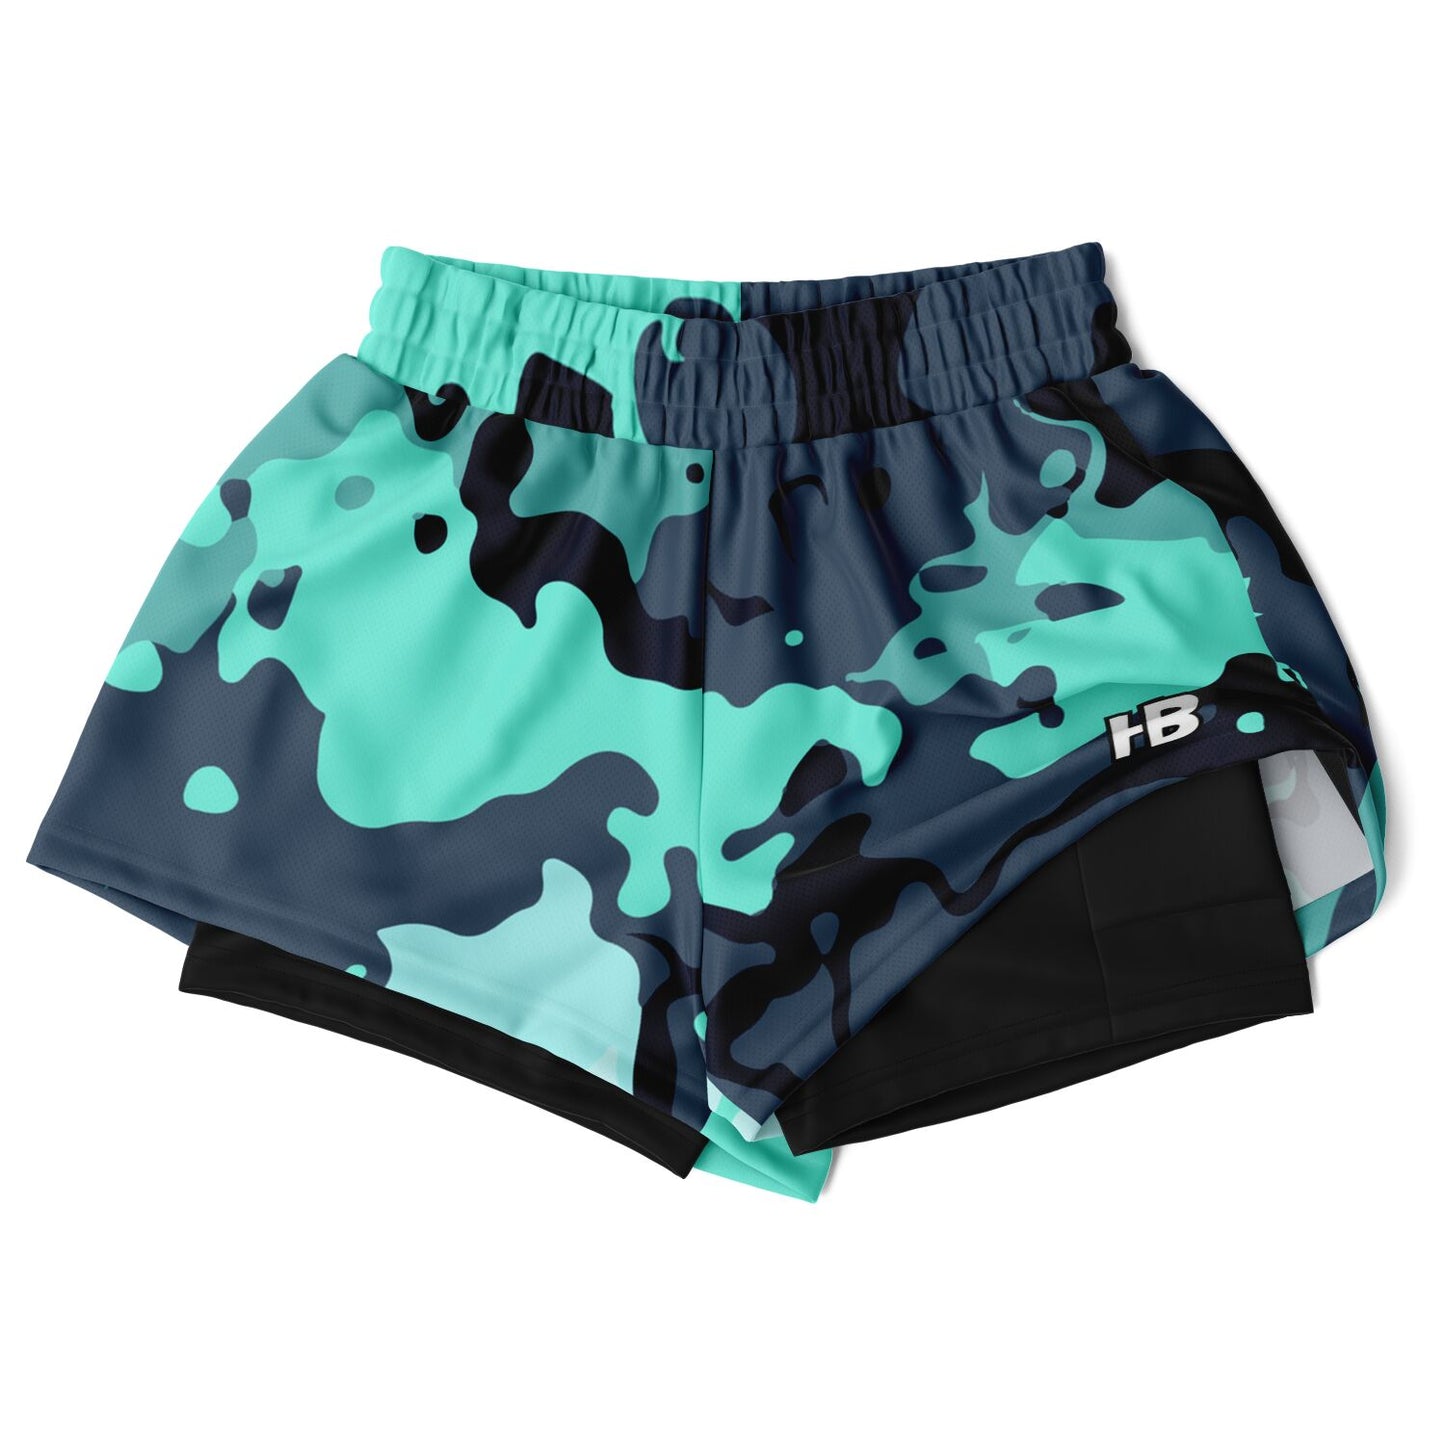 CrazY cAmO mEn AnD wOmEn's 2 In 1 ShOrTs